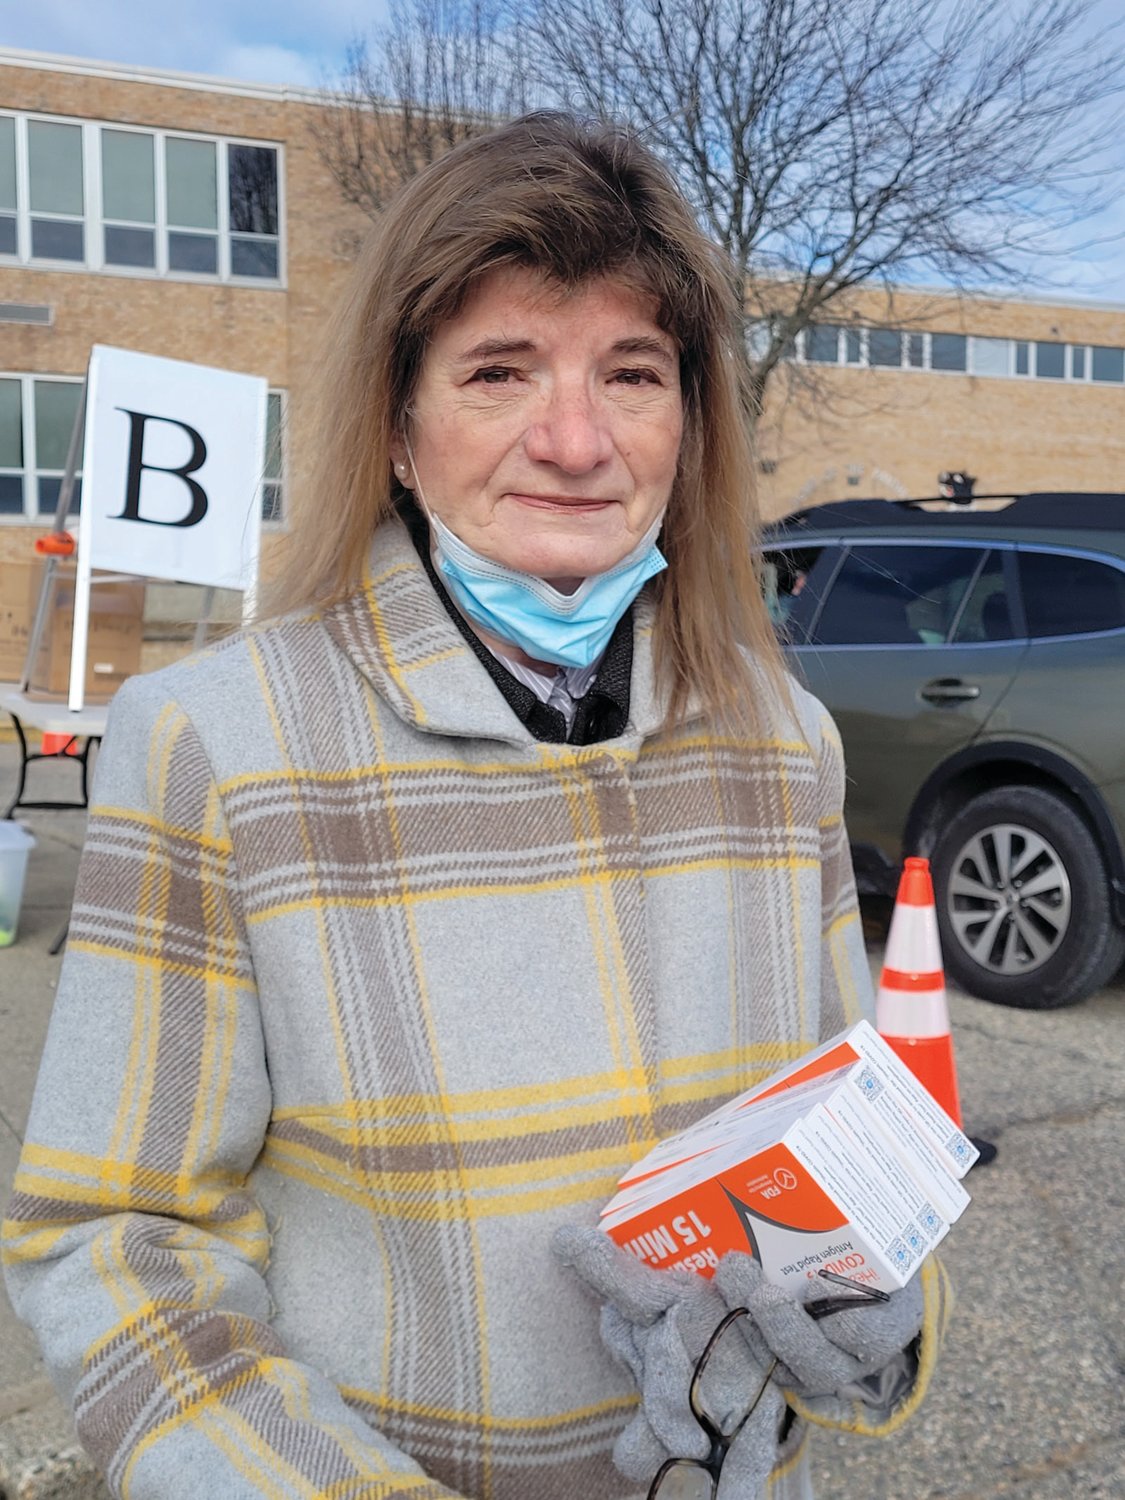 NEW COMMITTEE MEMBER: Marysue Andreozzi, Johnston School Committee's newest member, was on hand several weeks ago to hand out free test kits in the freezing cold.